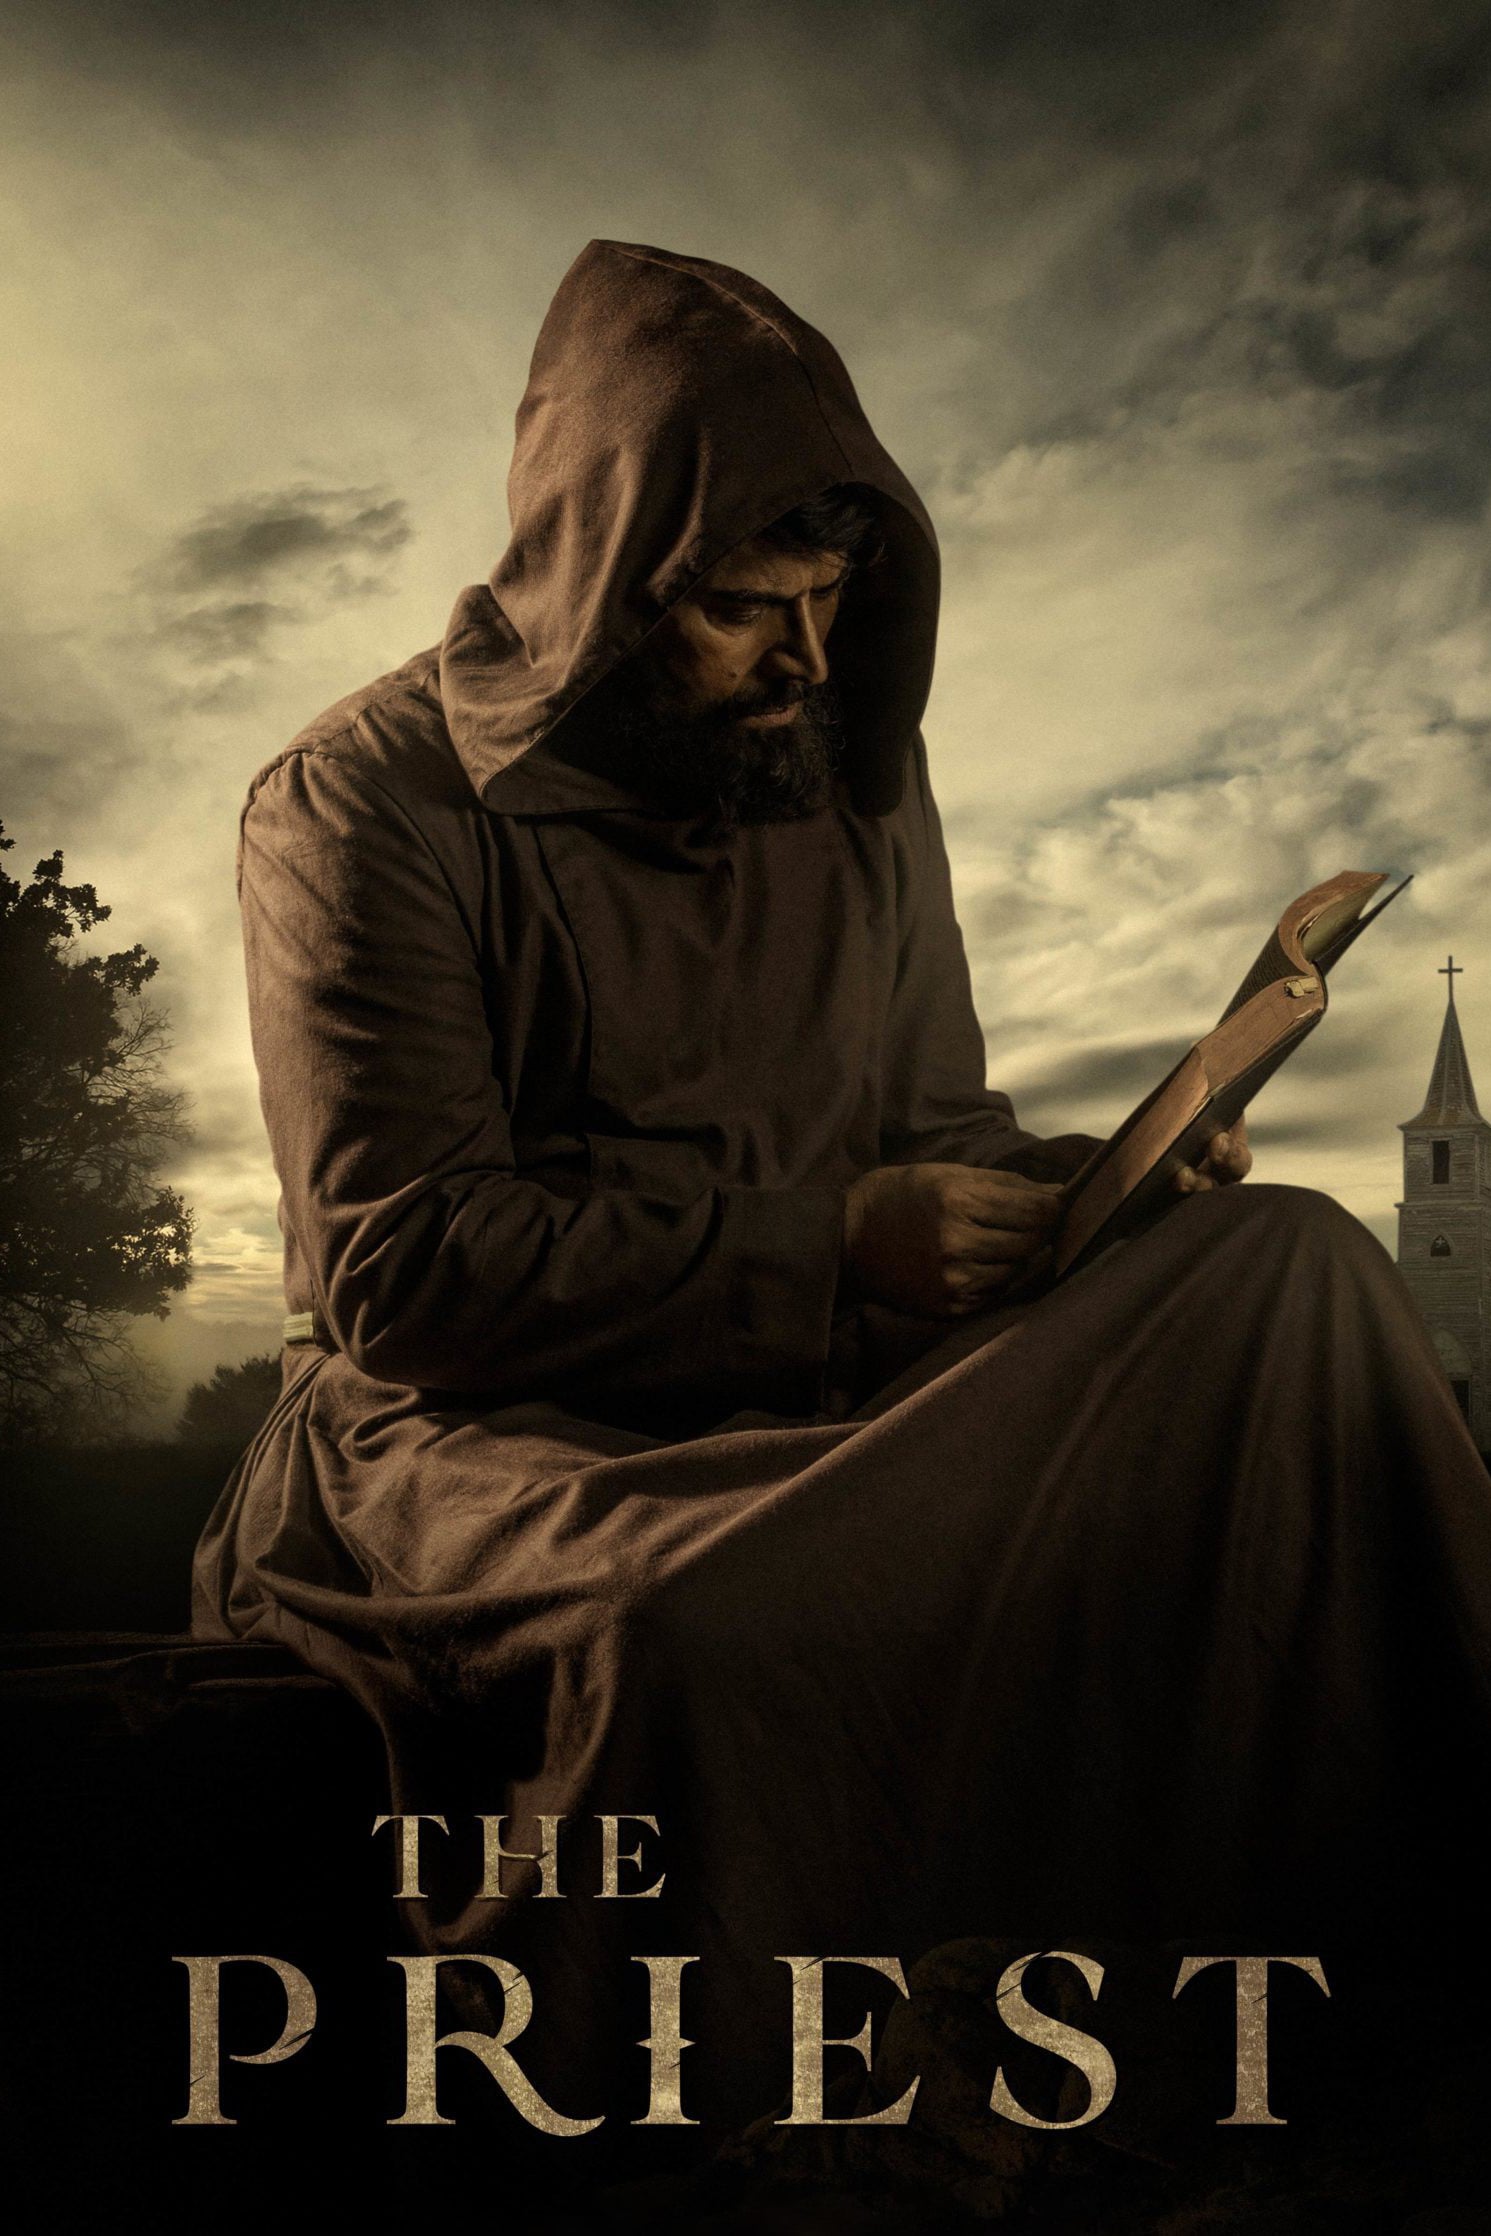 Poster for the movie "The Priest"